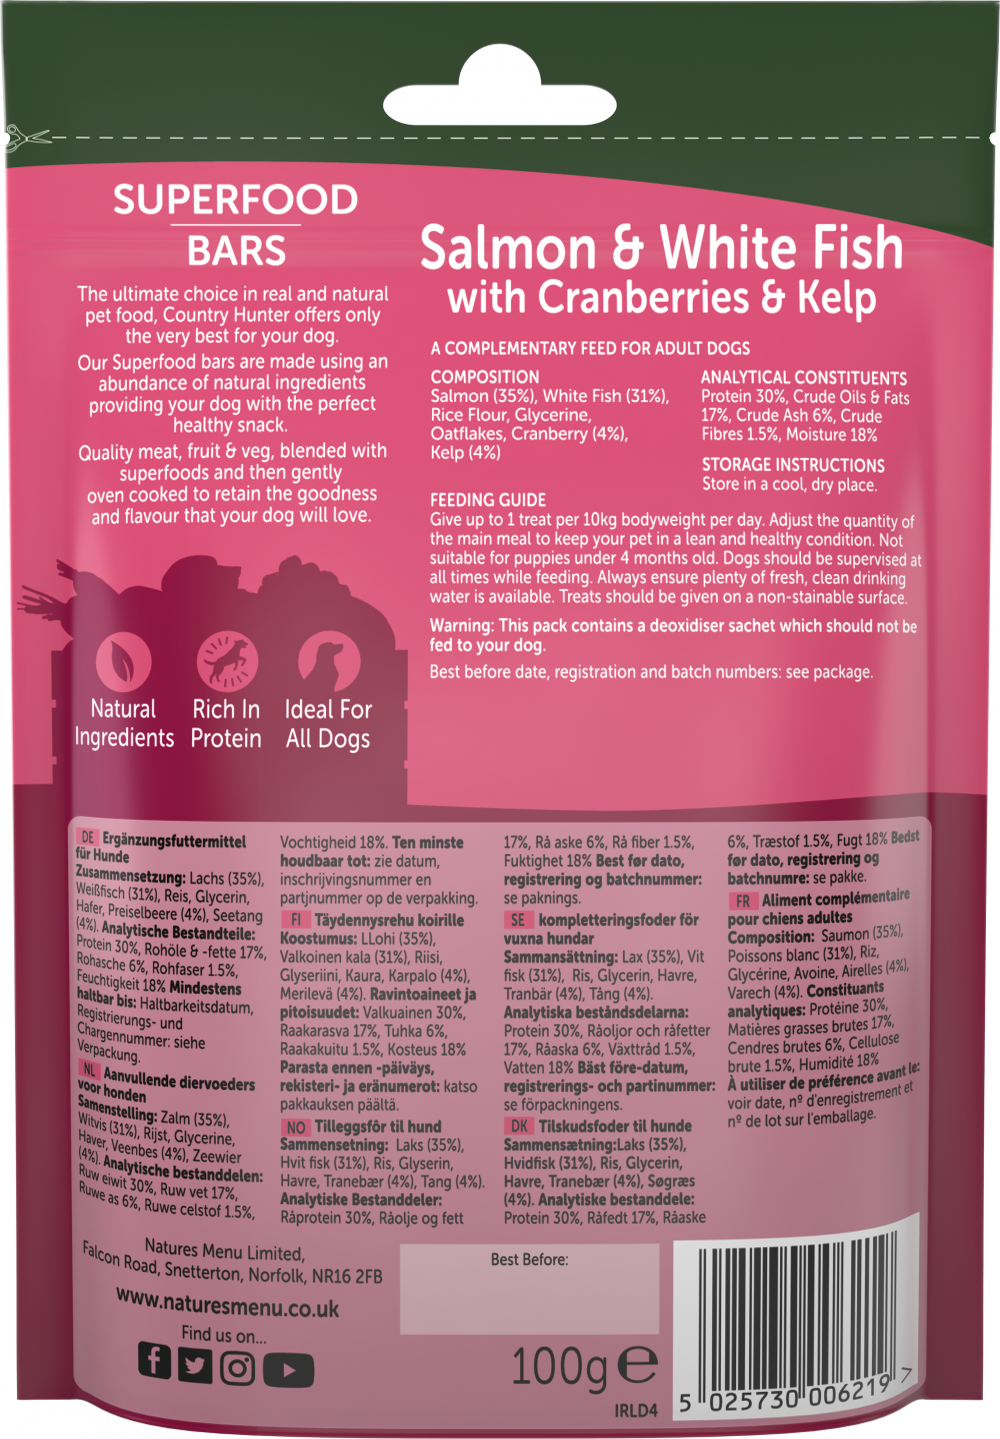 Country Hunter Salmon with White Fish with Cranberries & Kelp Superfood Treat Bars 100g